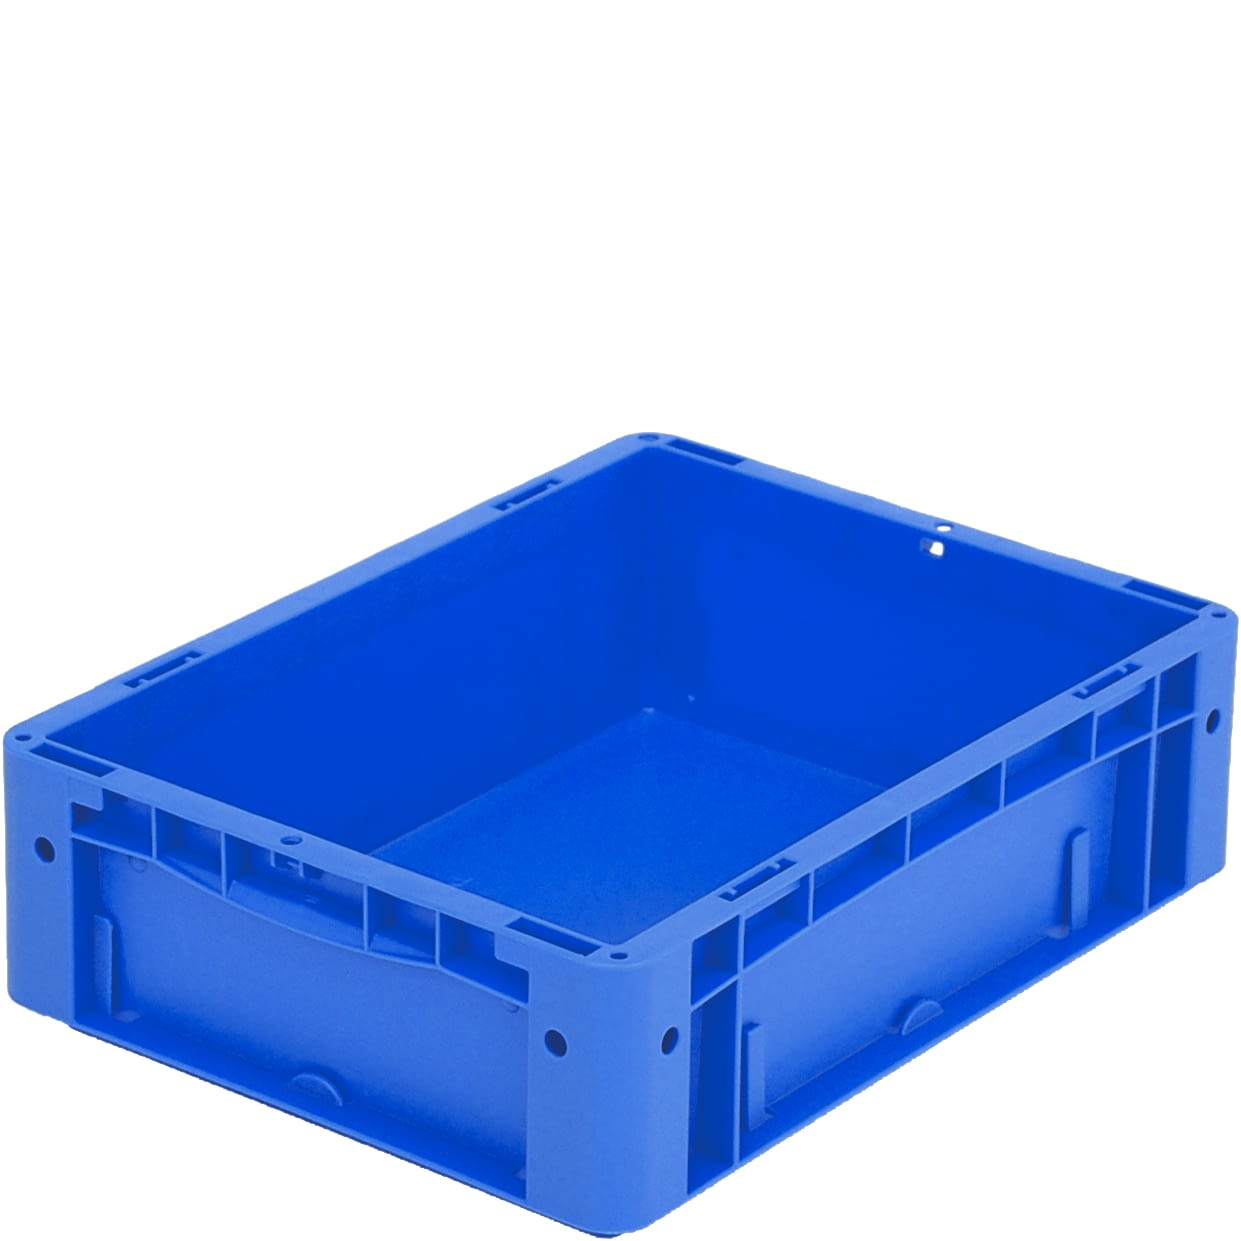 European size stacking containers XL - standard version